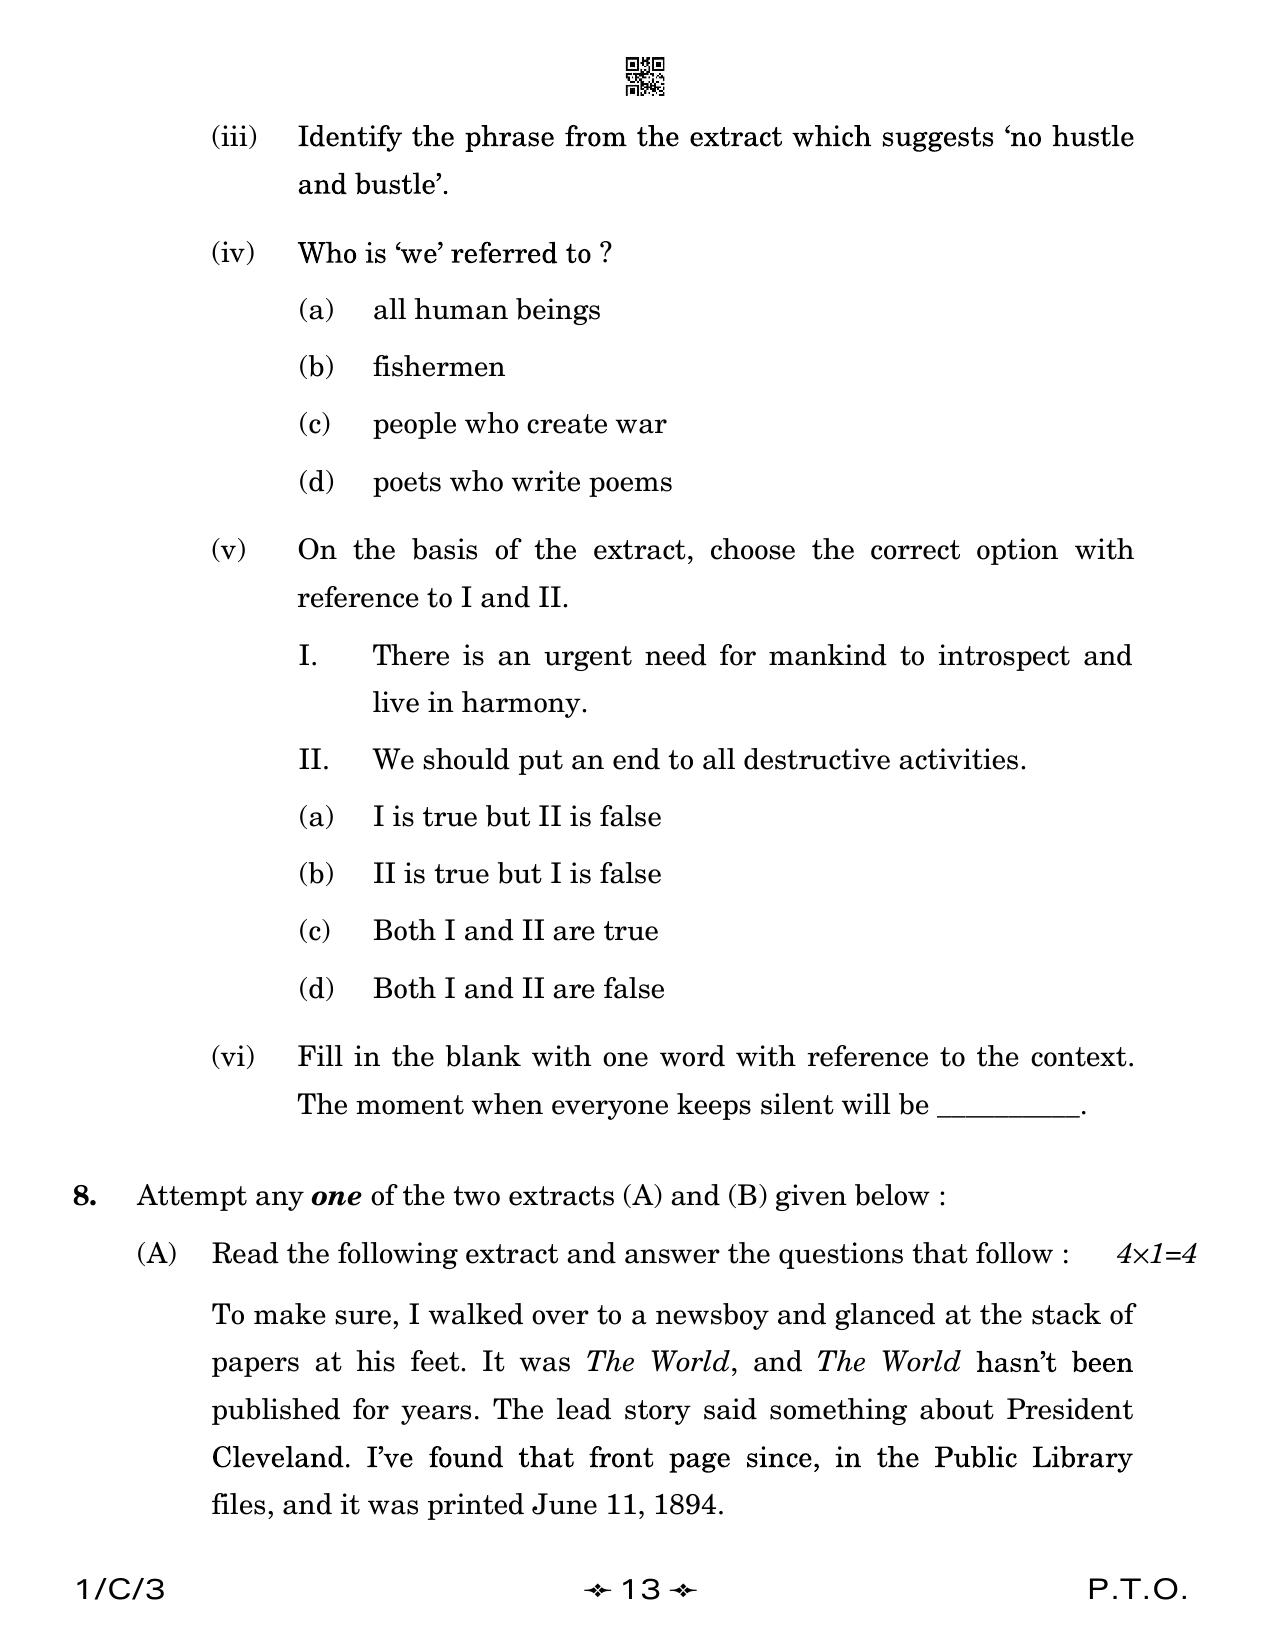 CBSE Class 12 1-3 English Core 2023 (Compartment) Question Paper - Page 13